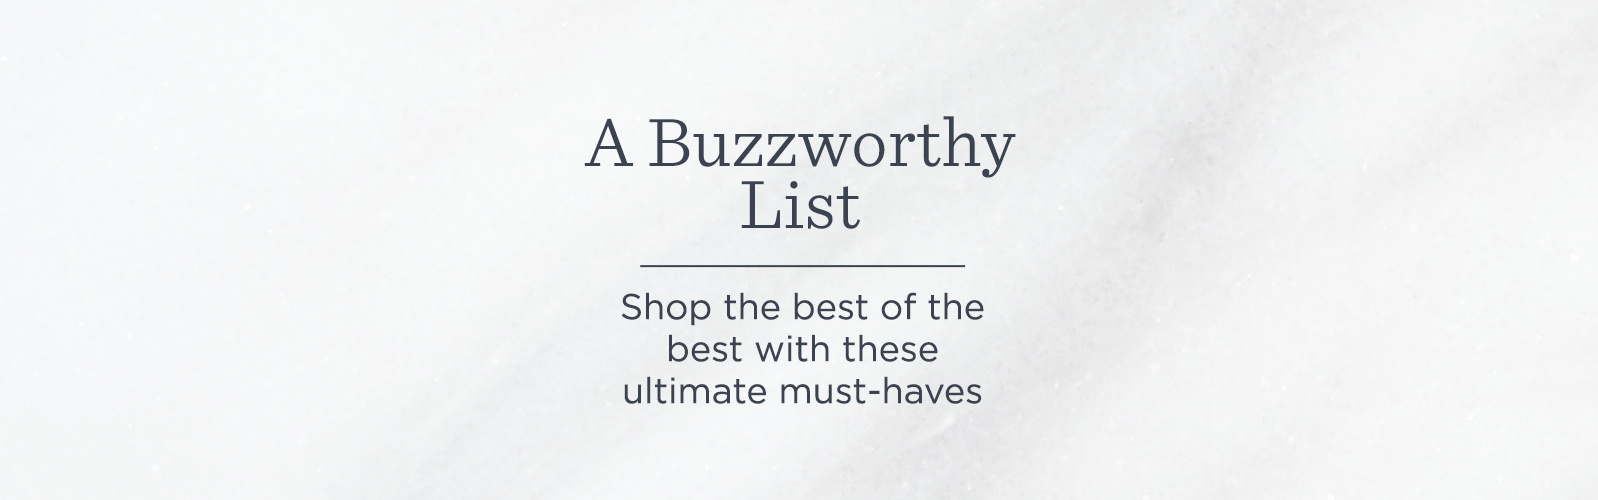 A Buzzworthy List,  Shop the best of the best with these ultimate must-haves